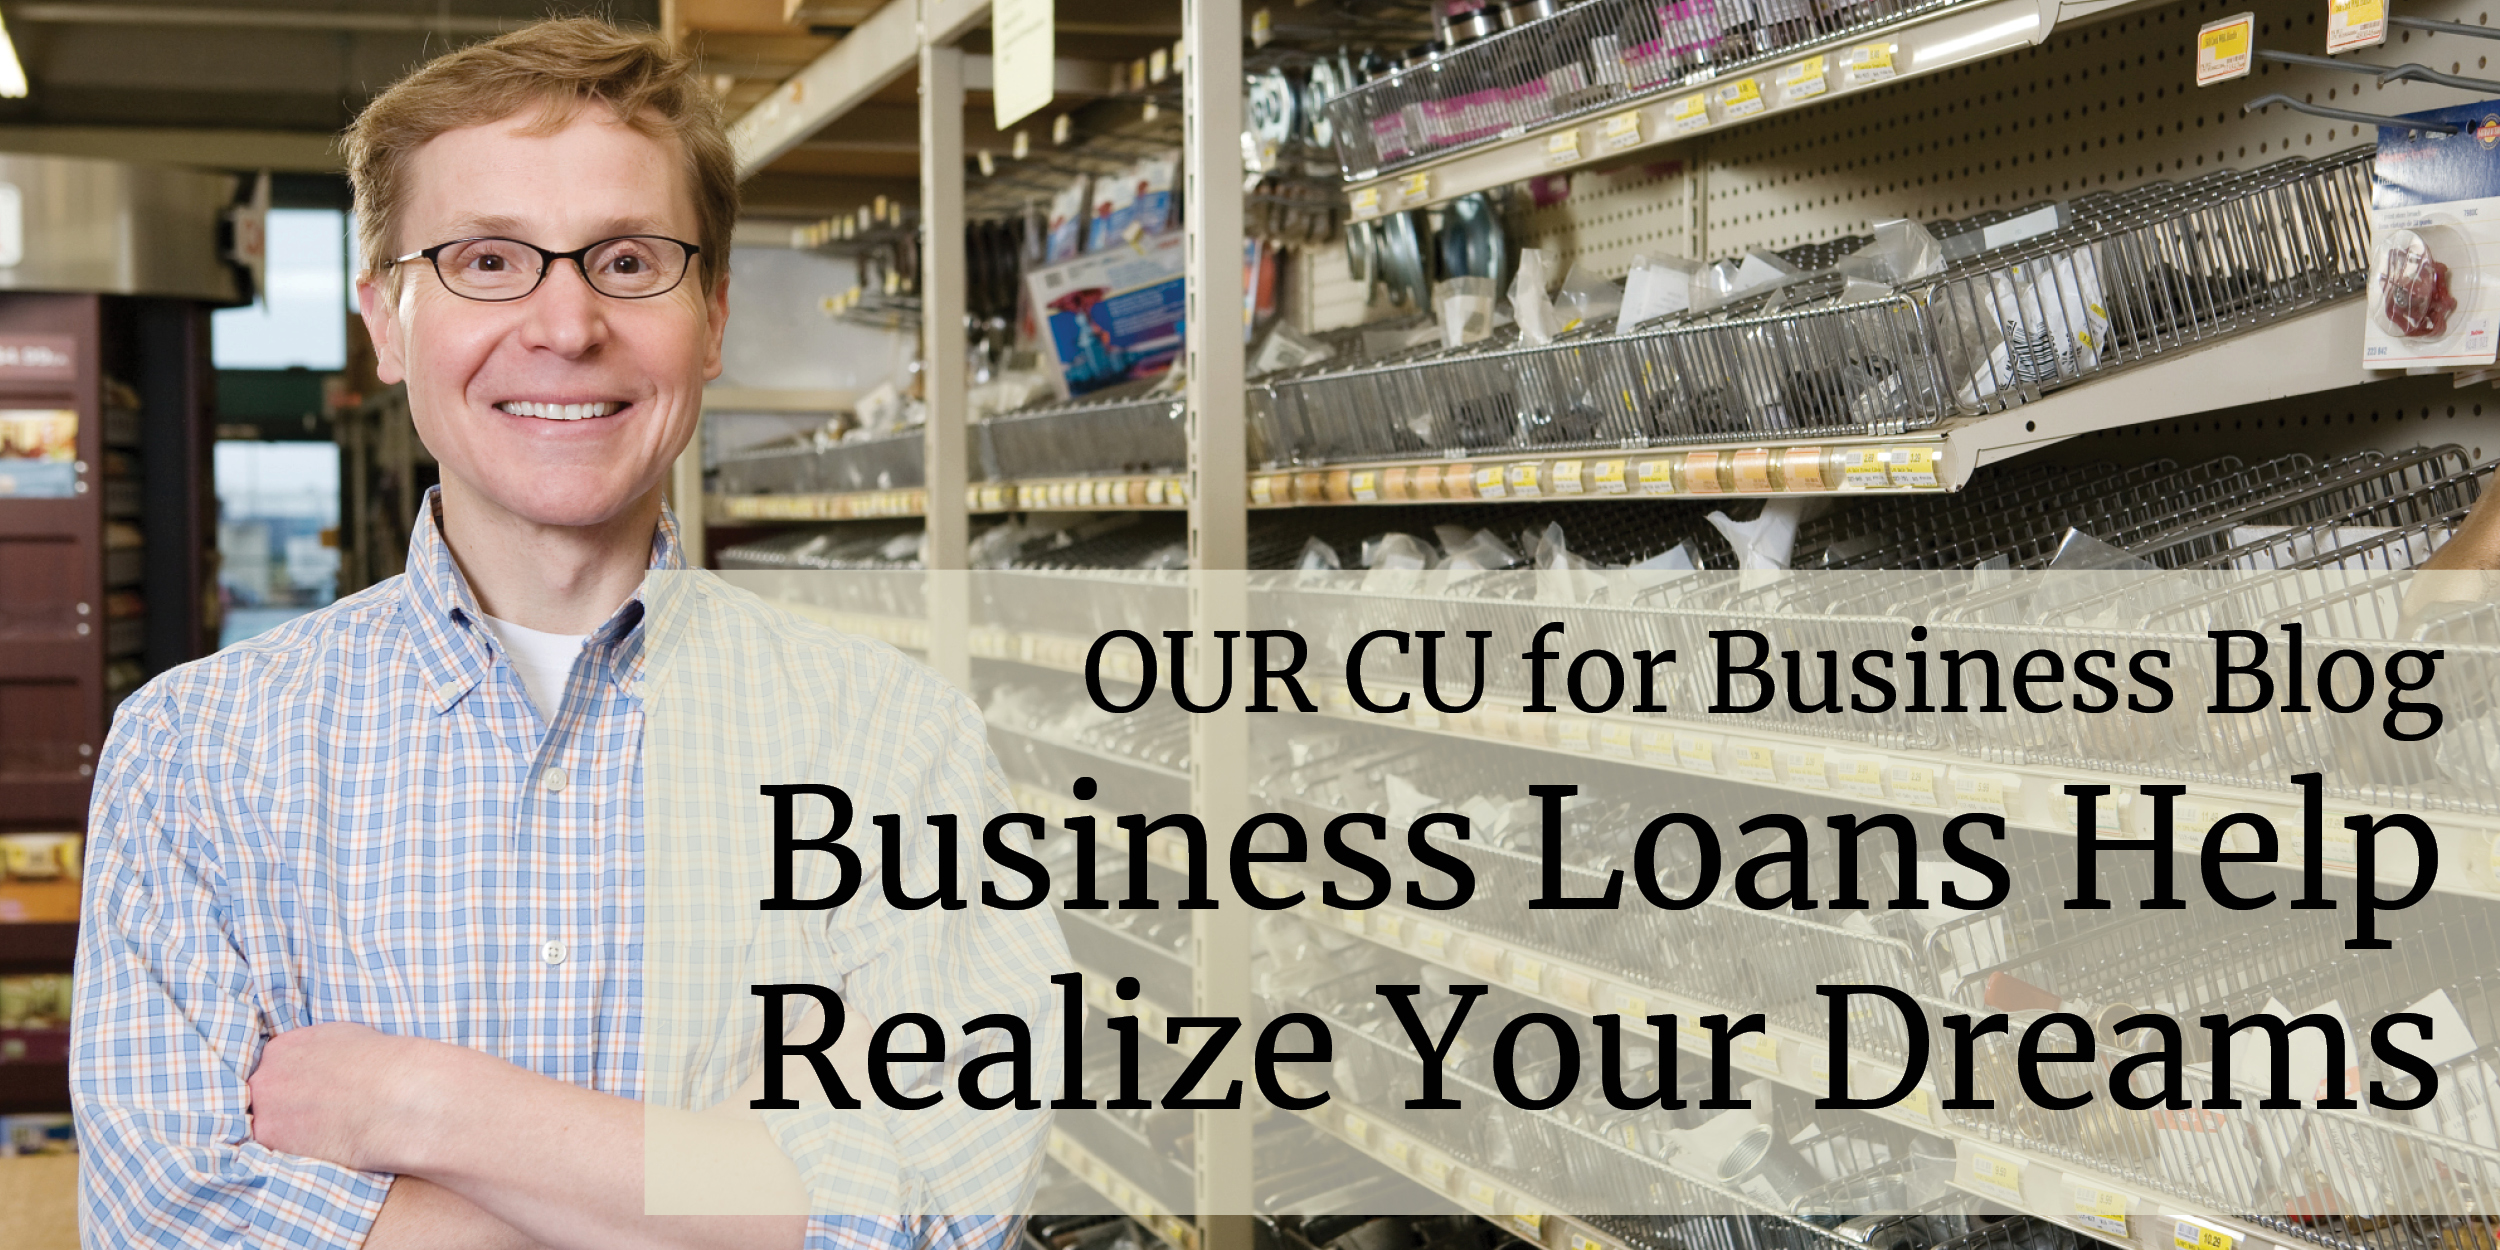 Business Loans Help Realize Your Dreams